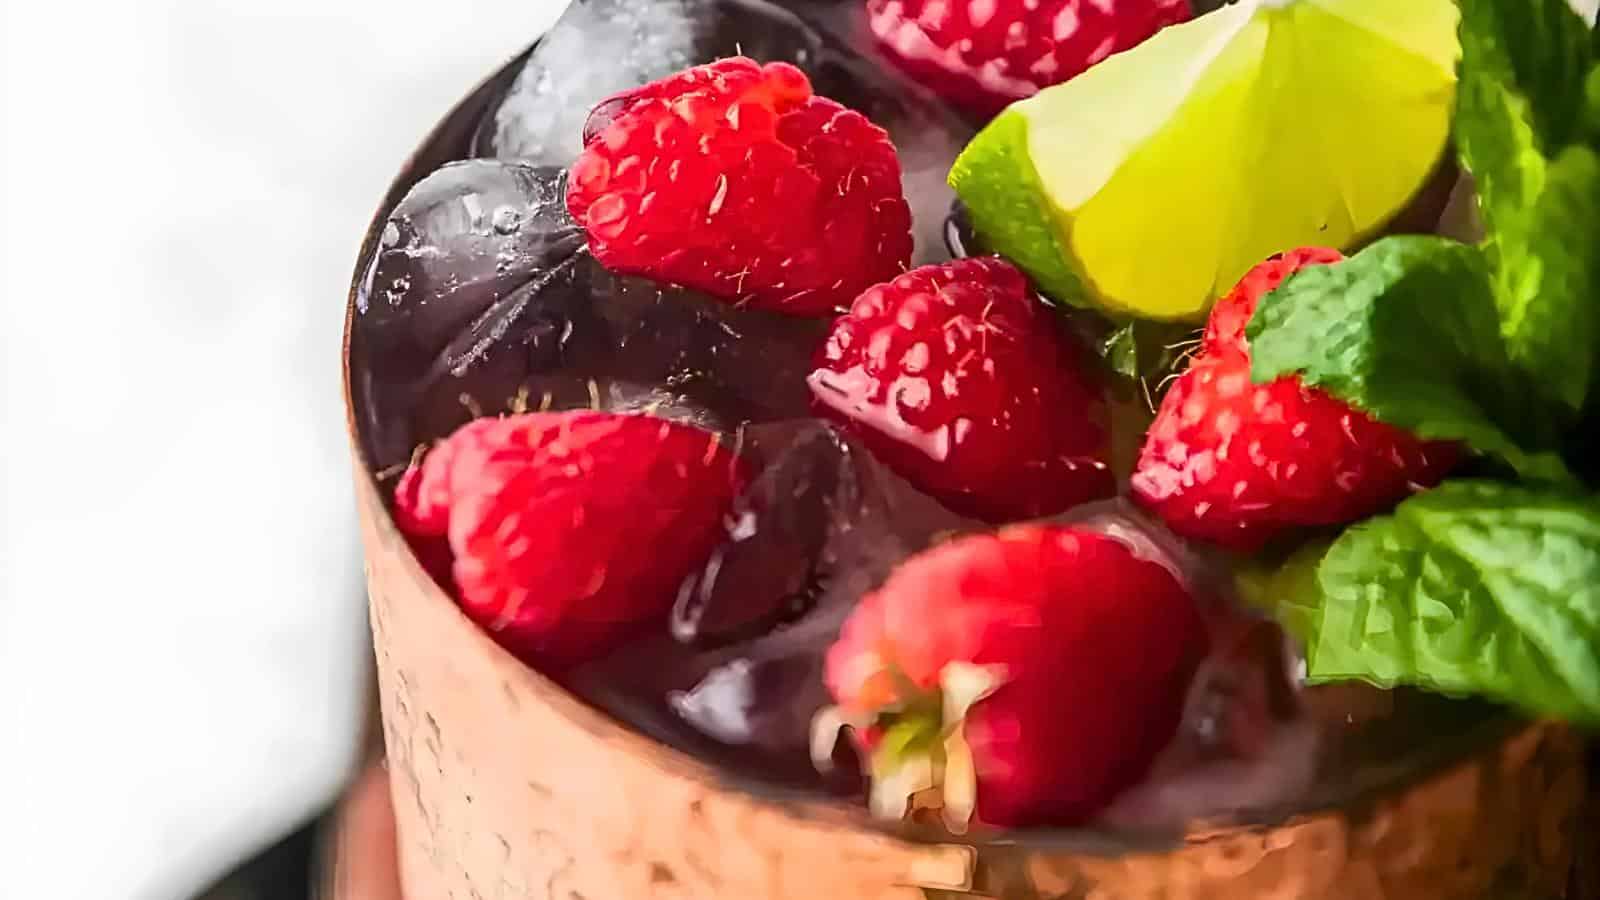 <p>A Raspberry Moscow Mule is a refreshing twist on the classic. Fresh raspberries, ginger beer, and lime come together for a fizzy, fruity summer drink. Make a mocktail version for a non-alcoholic treat!<br><strong>Get the Recipe: </strong><a href="https://www.sweetteaandthyme.com/raspberry-moscow-mule-cocktail-mocktail/?utm_source=msn&utm_medium=page&utm_campaign=msn" rel="noopener">Raspberry Moscow Mule Cocktail (+ Mocktail!)</a></p>